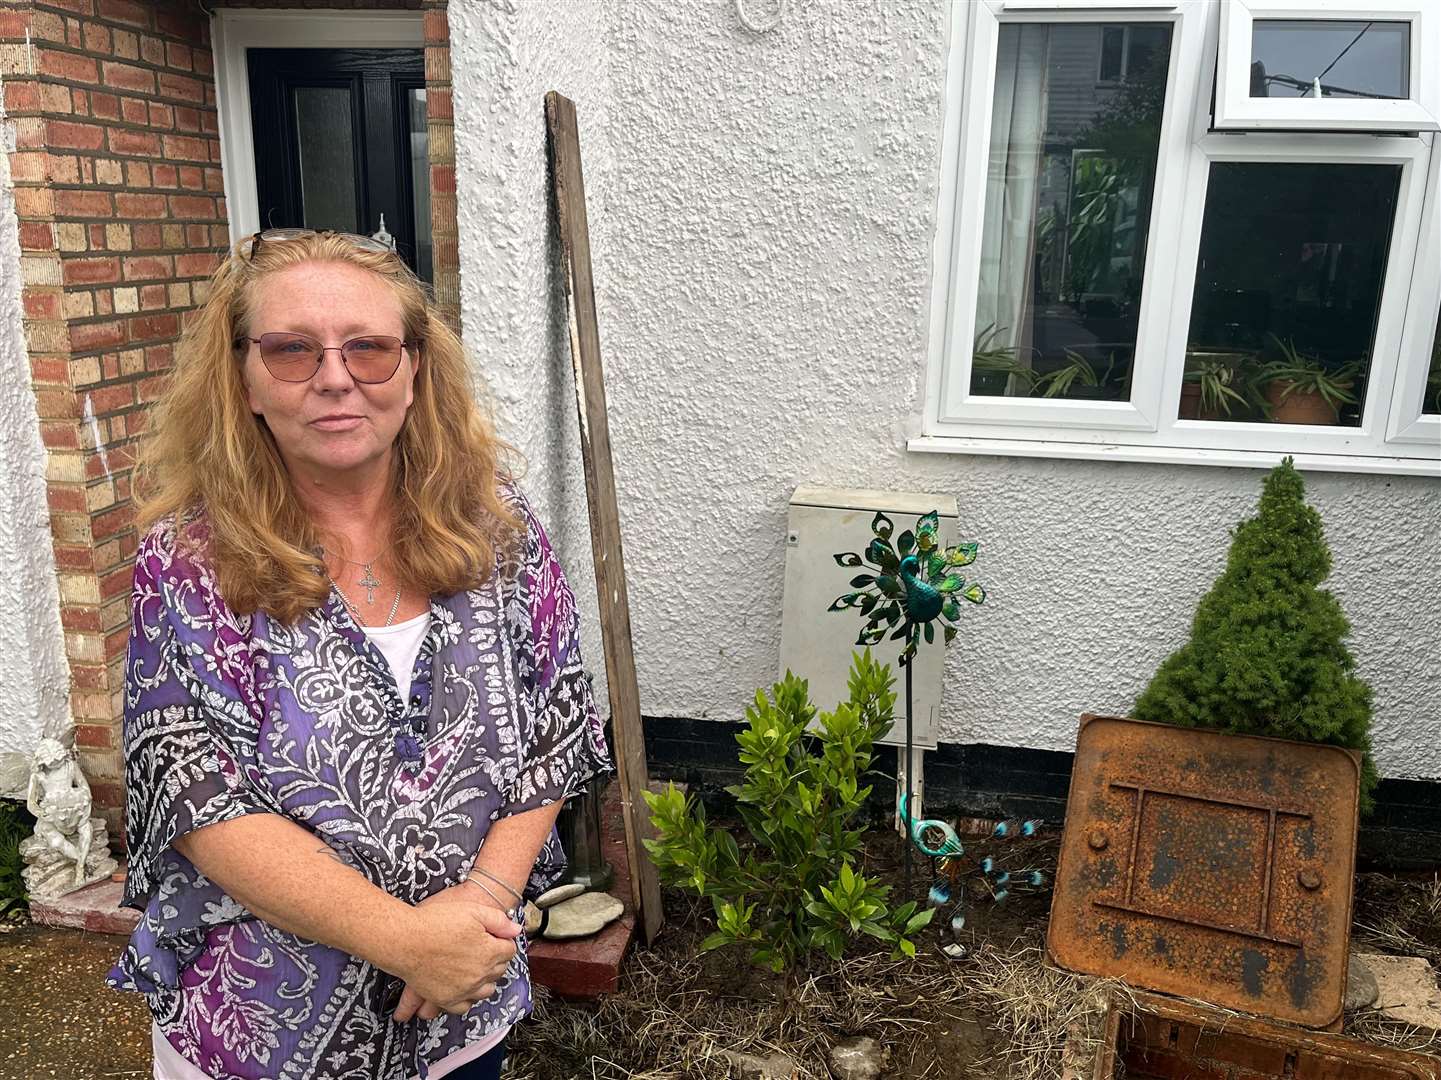 Vikki Storey, from Brookland, on the Romney Marsh, says she is being driven “insane” by water leaks which flood her garden